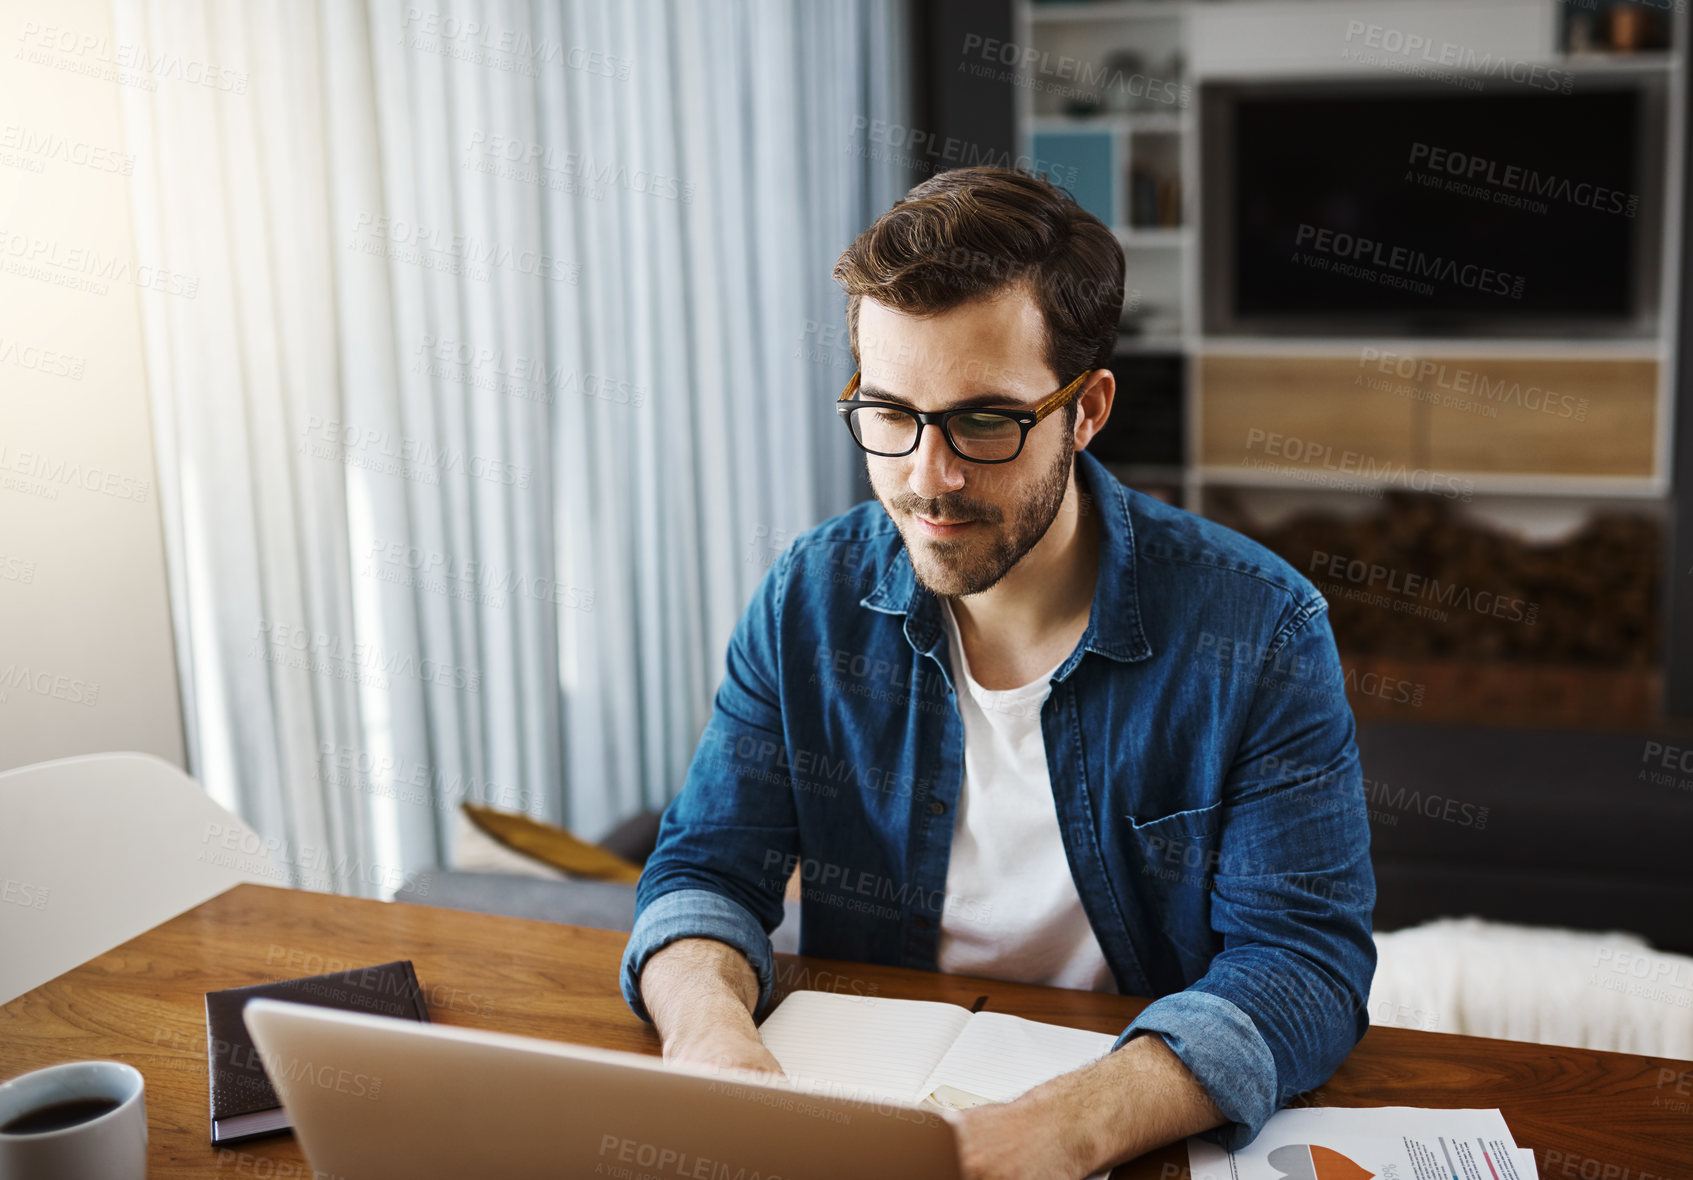 Buy stock photo Shot of a handsome young businessman sitting down and using his laptop while working from home